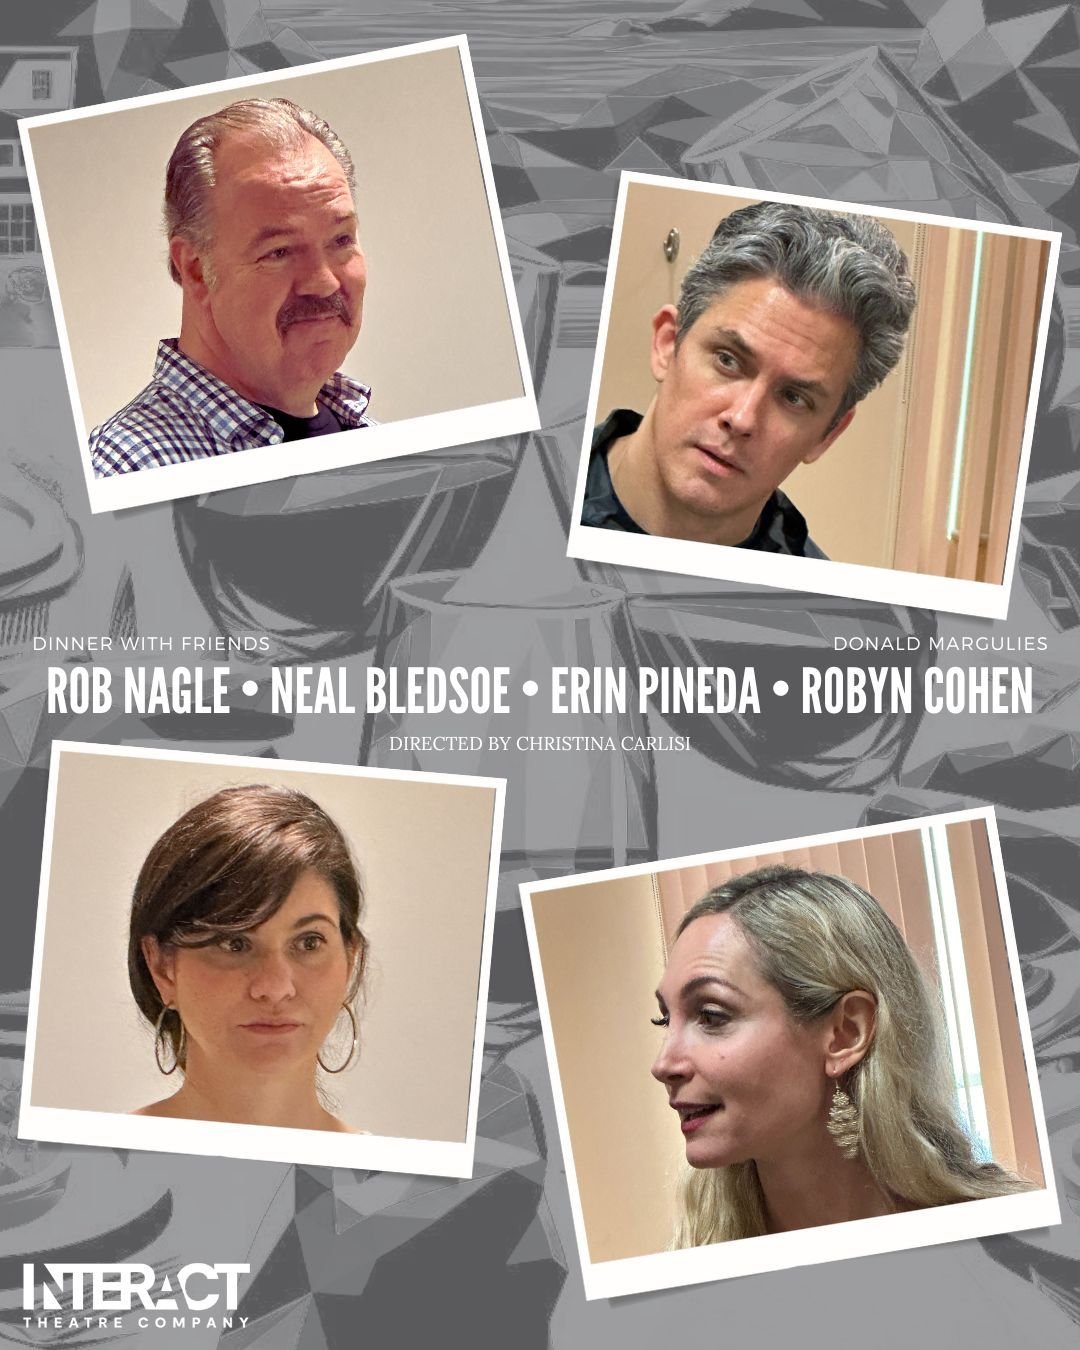 DINNER WITH FRIENDS
by Donald Margulies
Directed by Christina Carlisi

SATURDAY 5/11 AT 2 PM
Studio City Branch Library
12511 Moorpark St.
Studio City, CA

&quot;Wryly funny and richly layered, DINNER WITH FRIENDS is a modern masterpiece about the pa